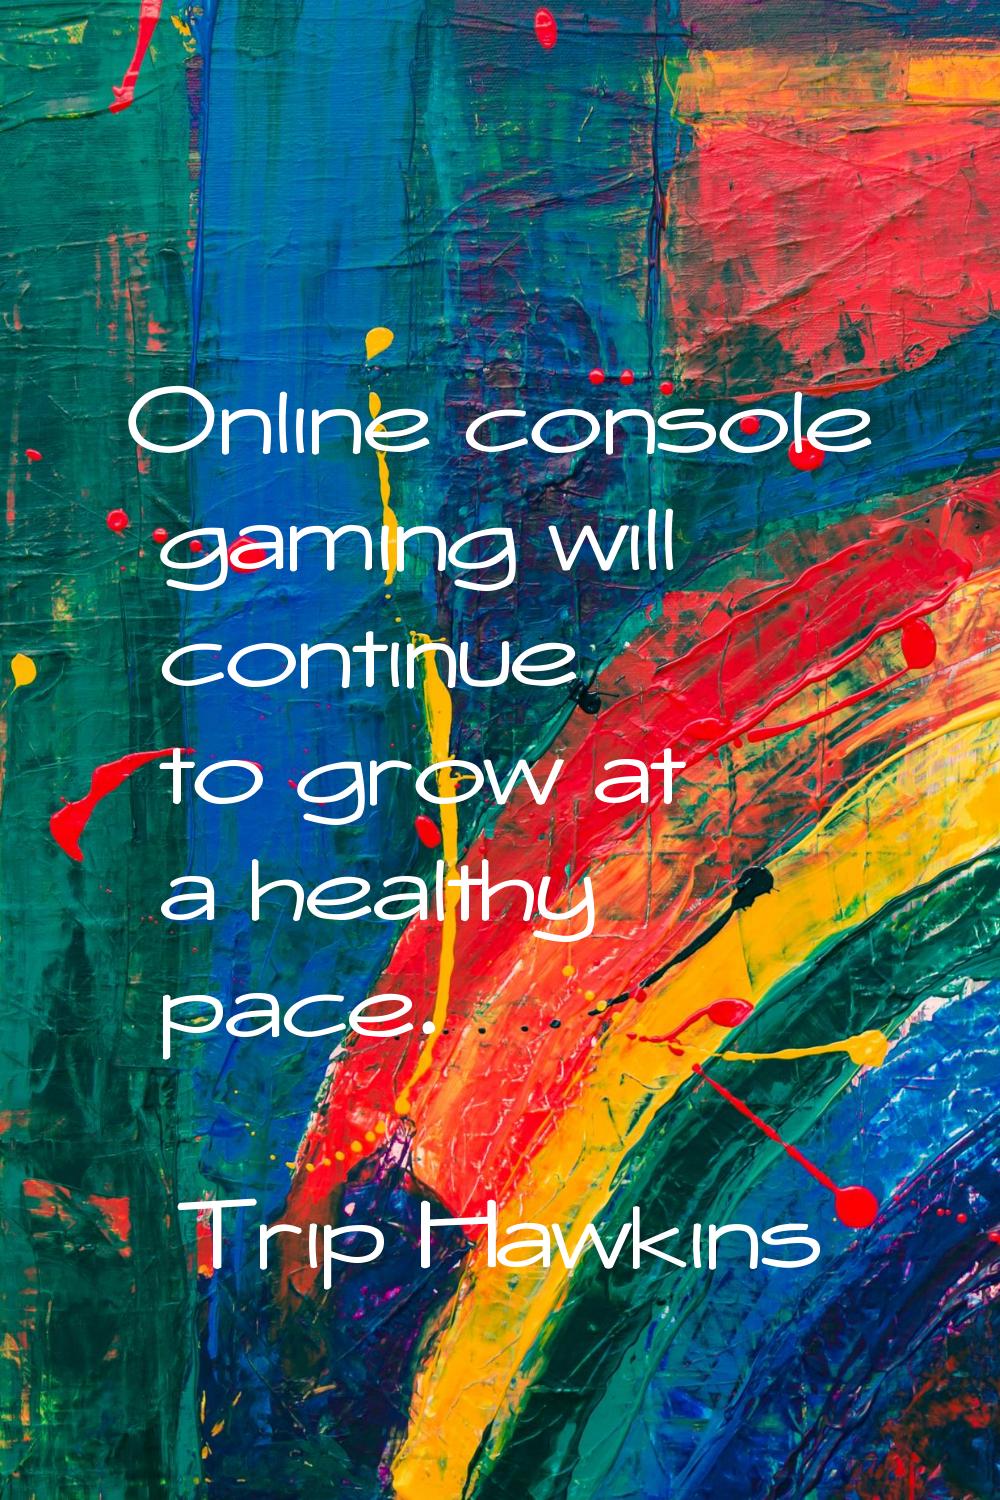 Online console gaming will continue to grow at a healthy pace.